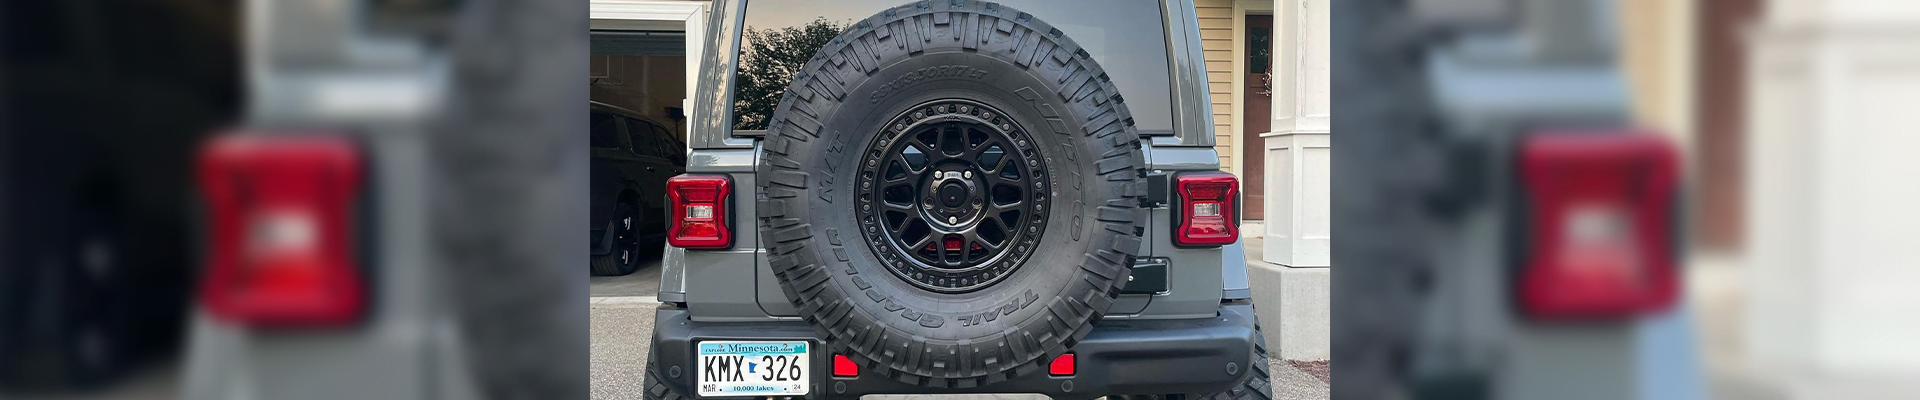 Jeep-Rubicon-Gallery-image-5.png